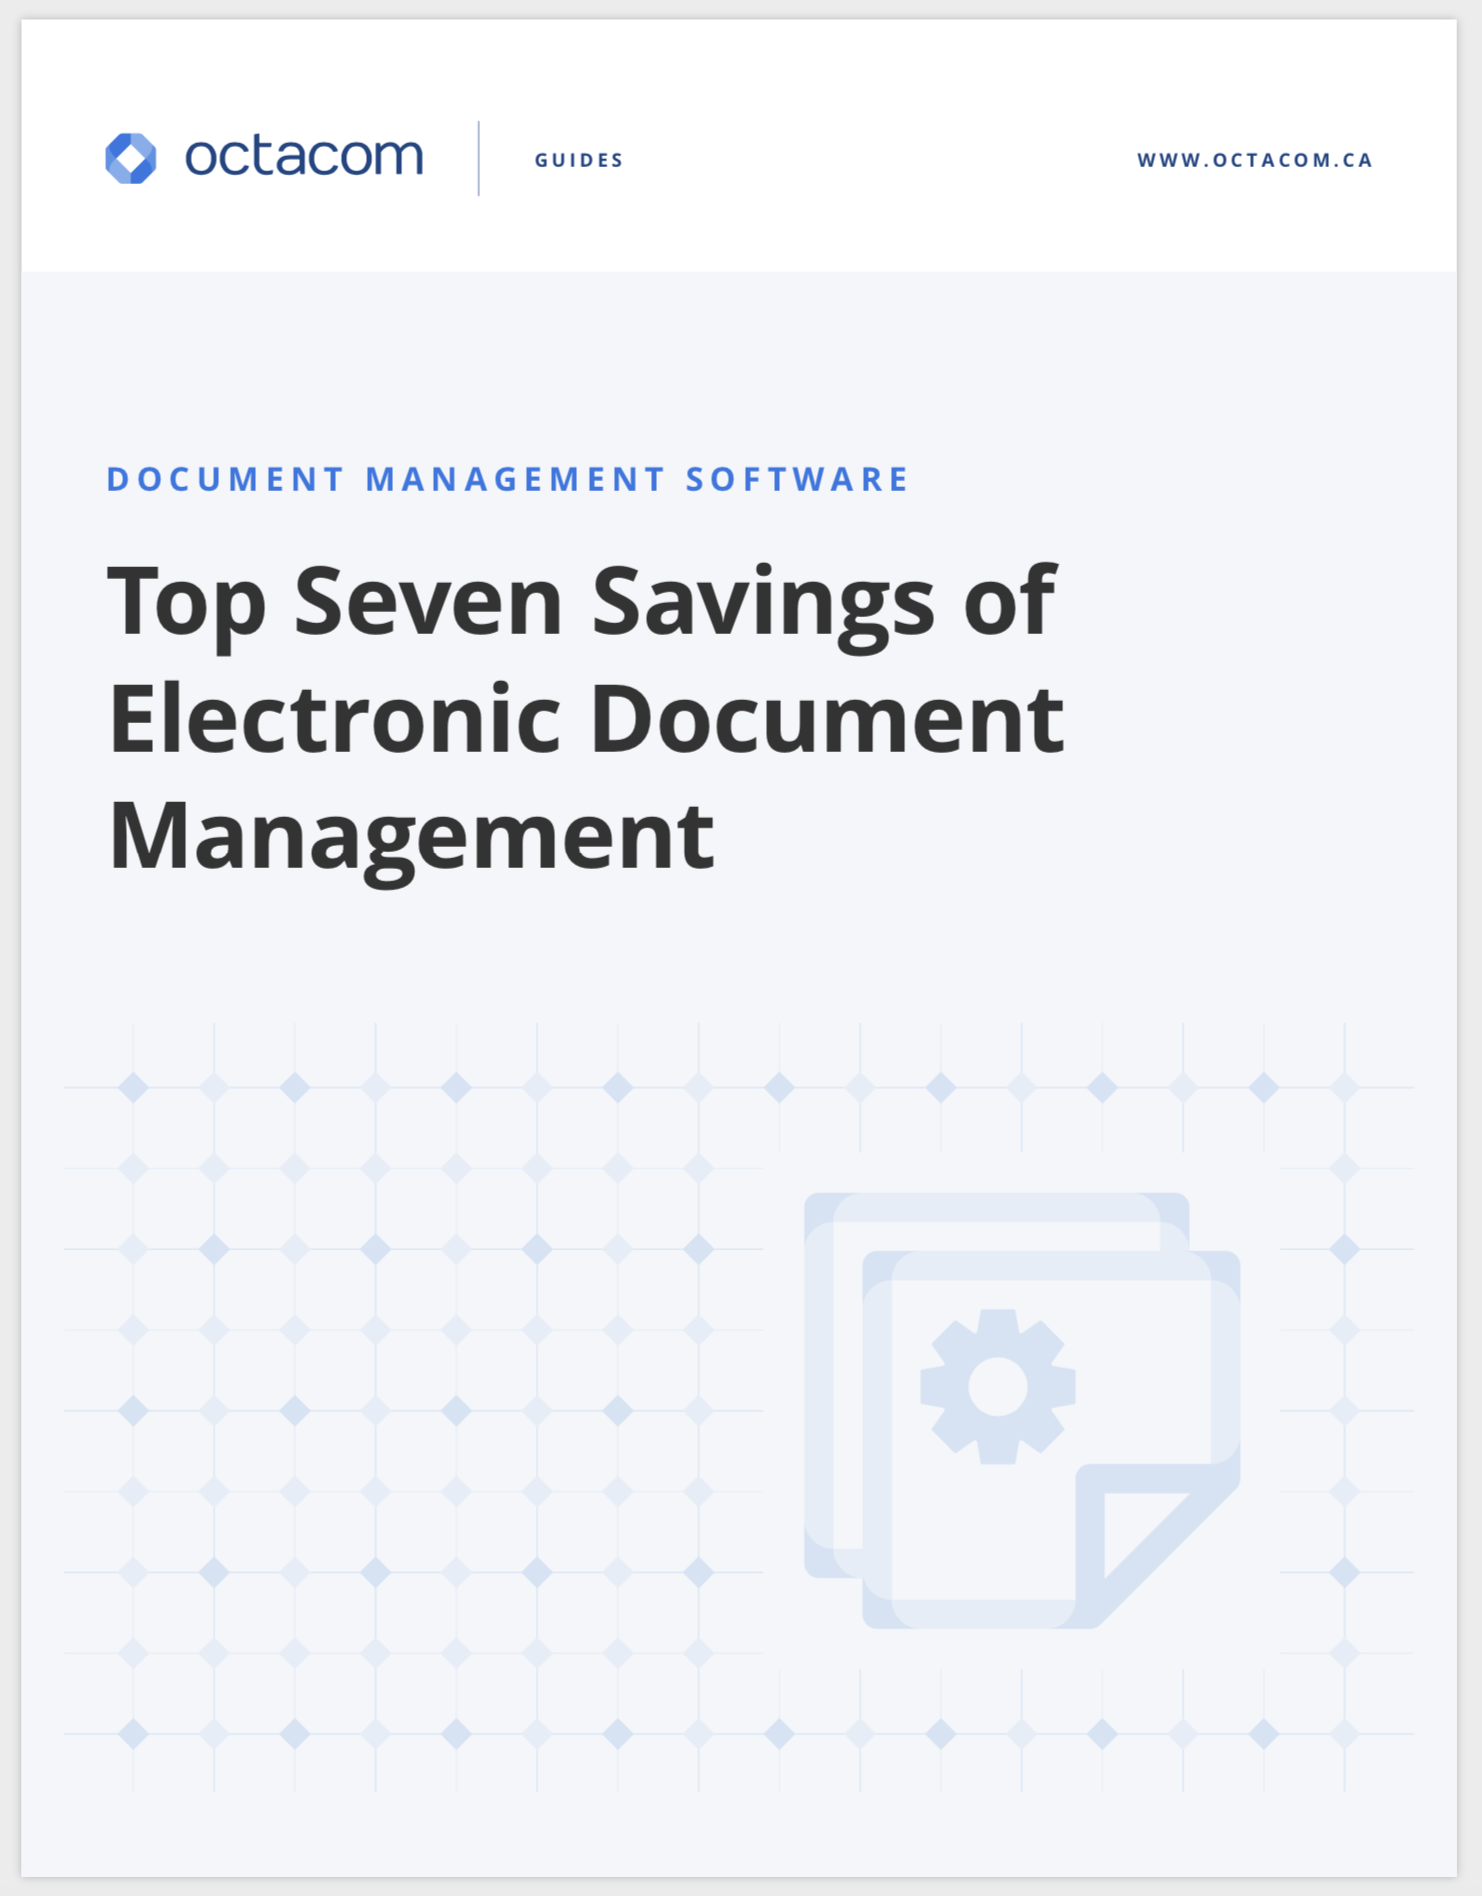 Top Seven Savings of Electronic Document Management booklet